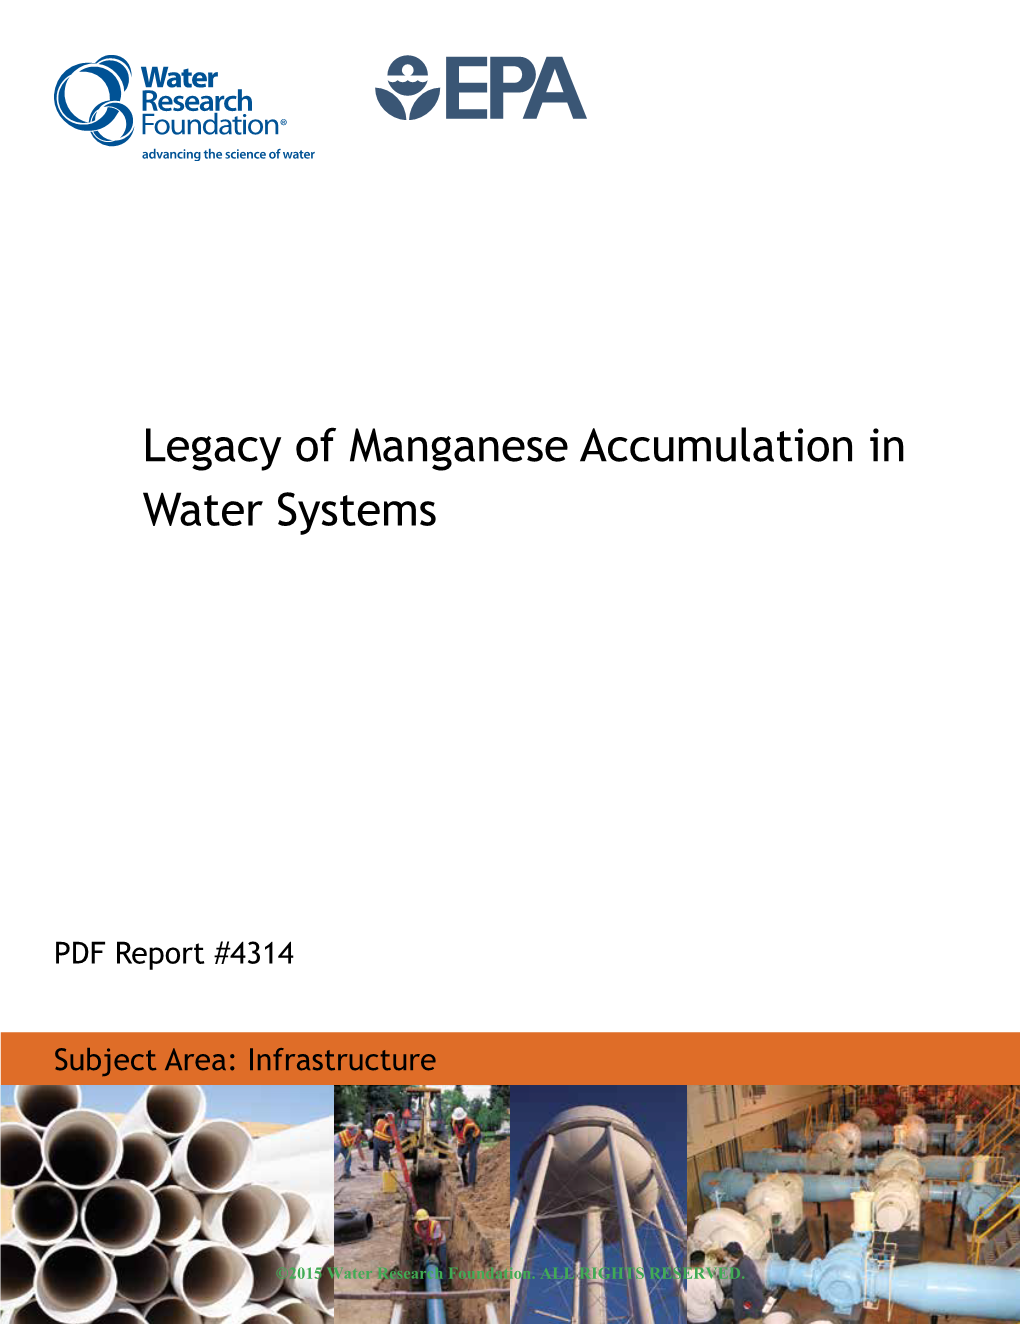 Legacy of Manganese Accumulation in Water Systems